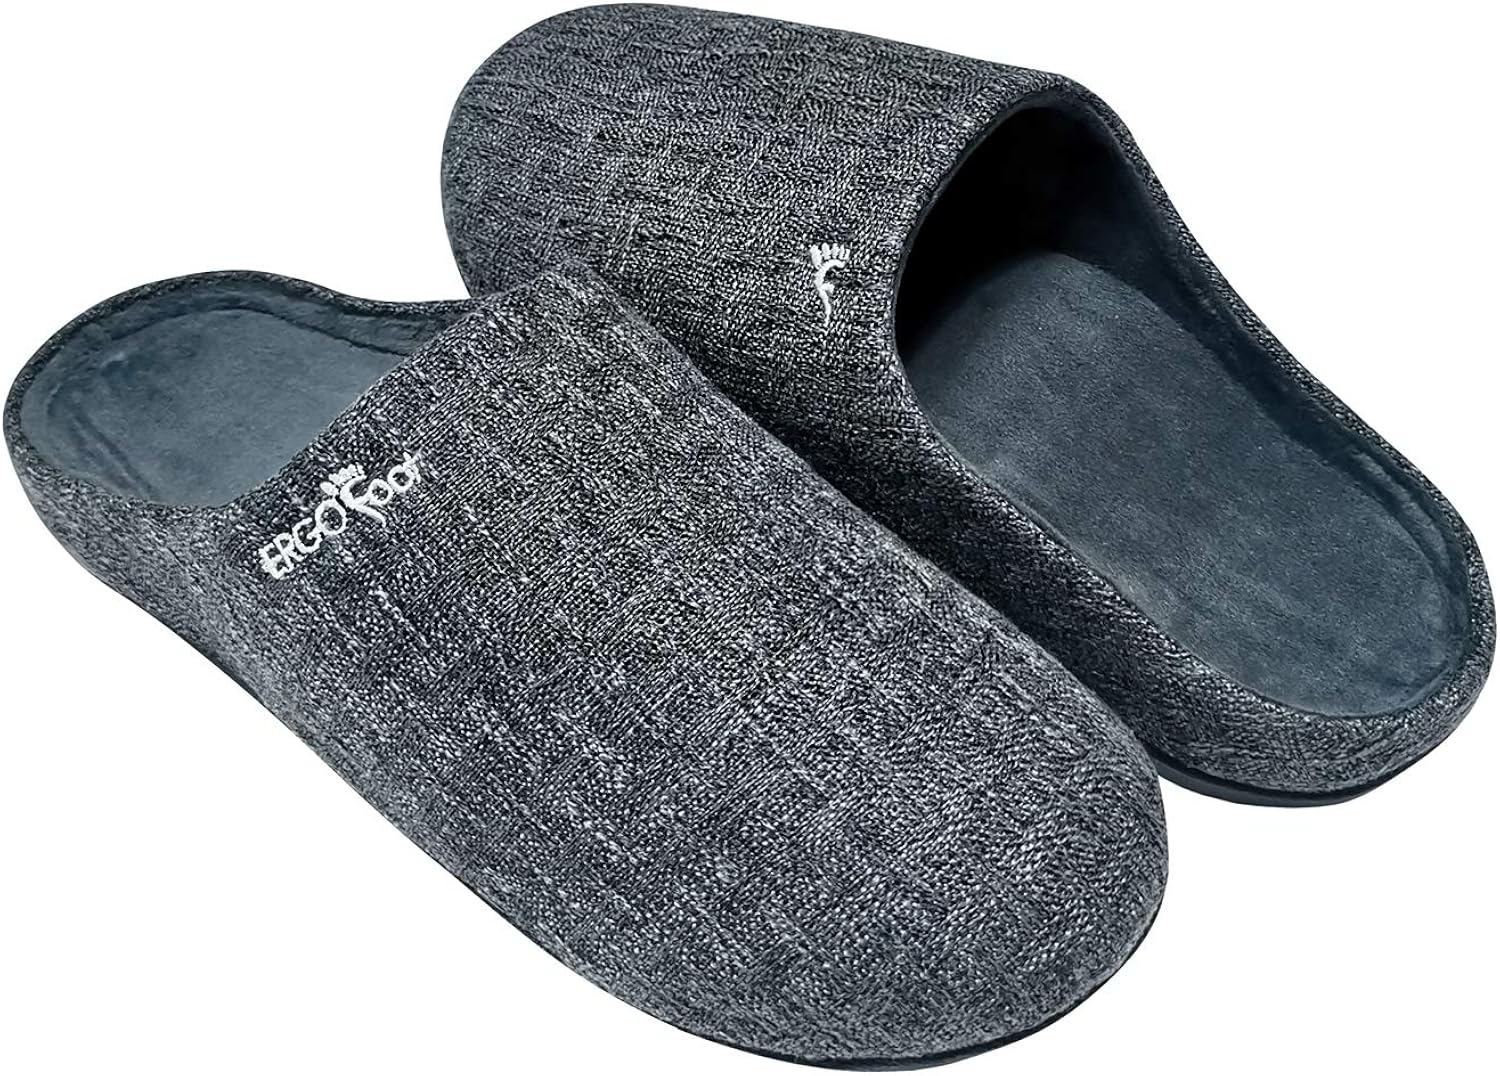 Orthotic Slippers with Arch Support for Plantar Fasciitis Pain Relief, Comfortable Orthopedic Clog House Shoes with Indoor Outdoor Anti-Skid Rubber Sole by ERGOfoot